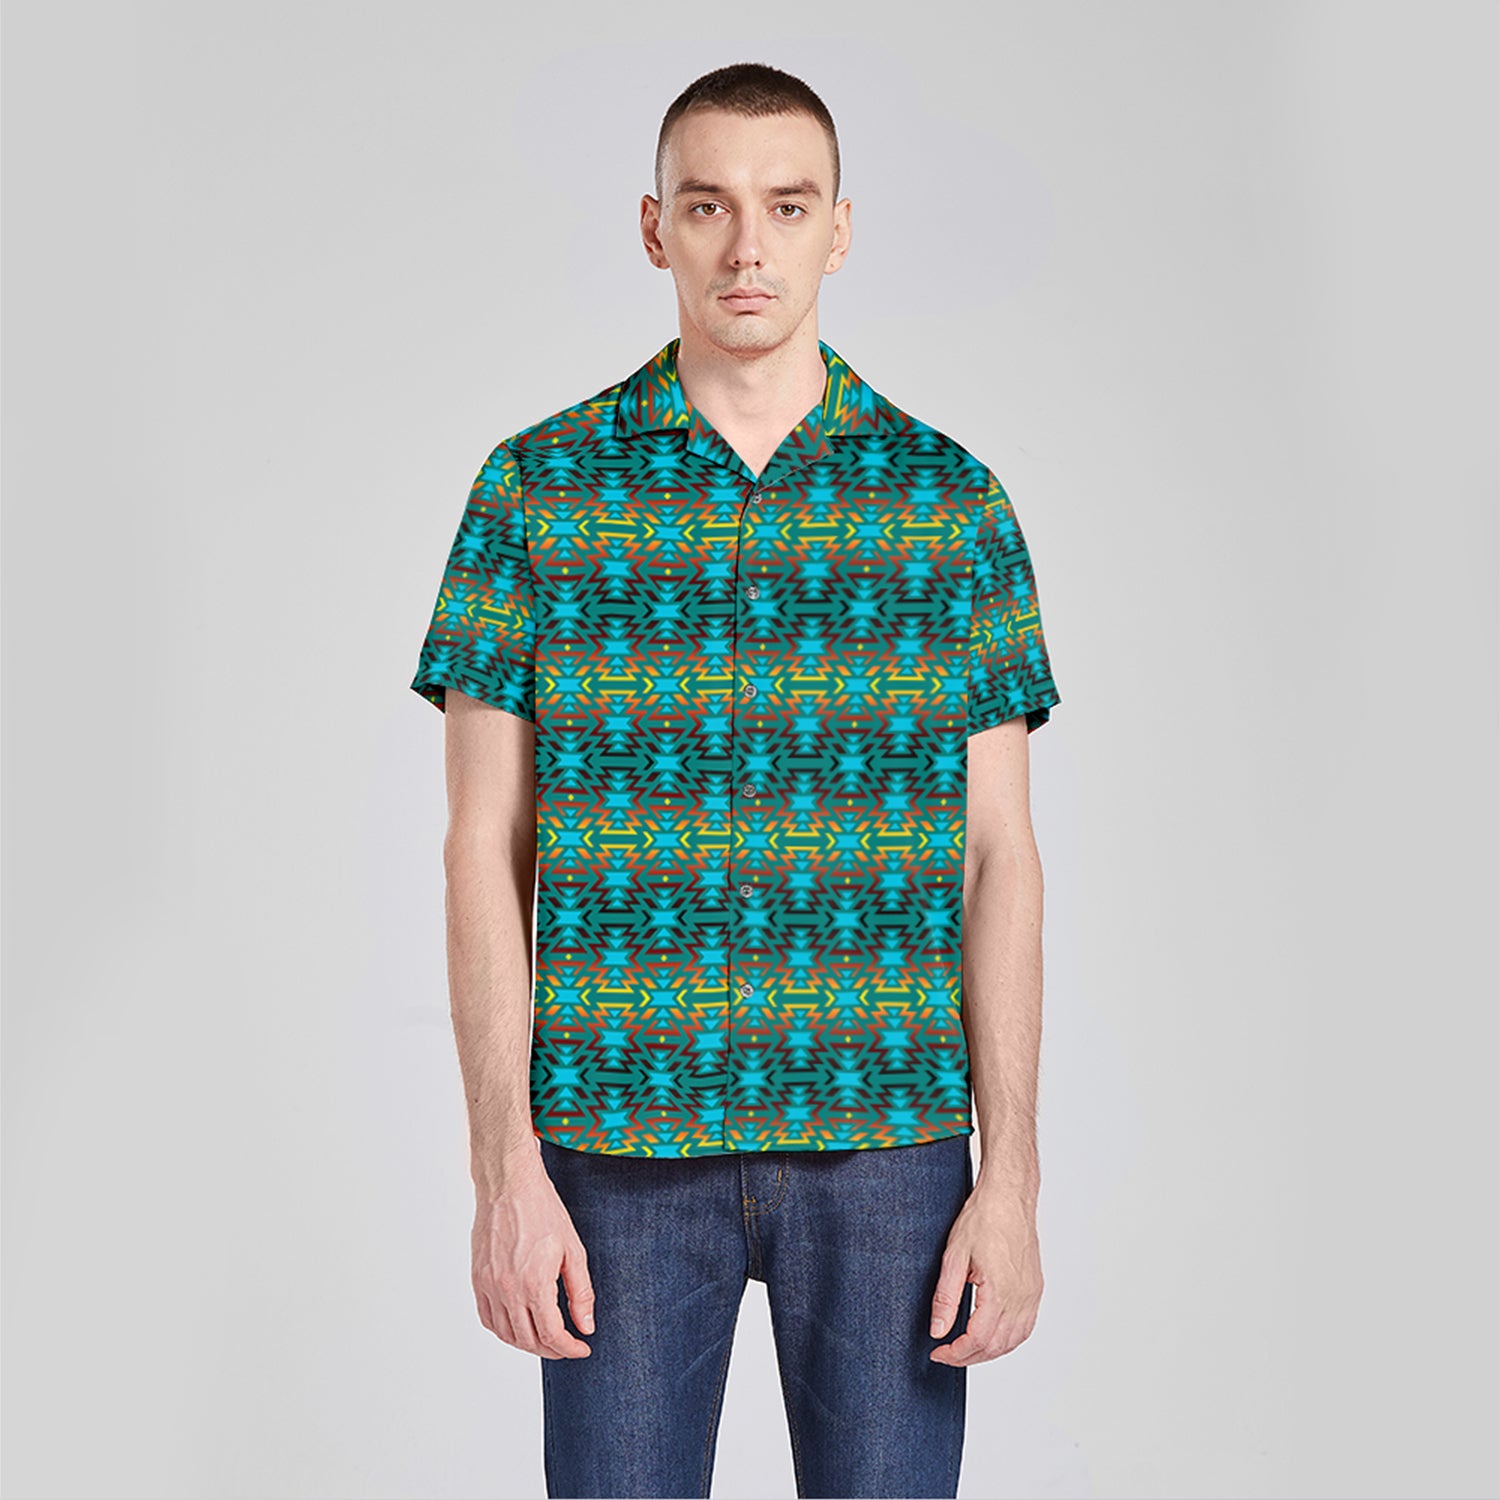 Fire Colors and Turquoise Teal Men's Casual Button Up Shirt